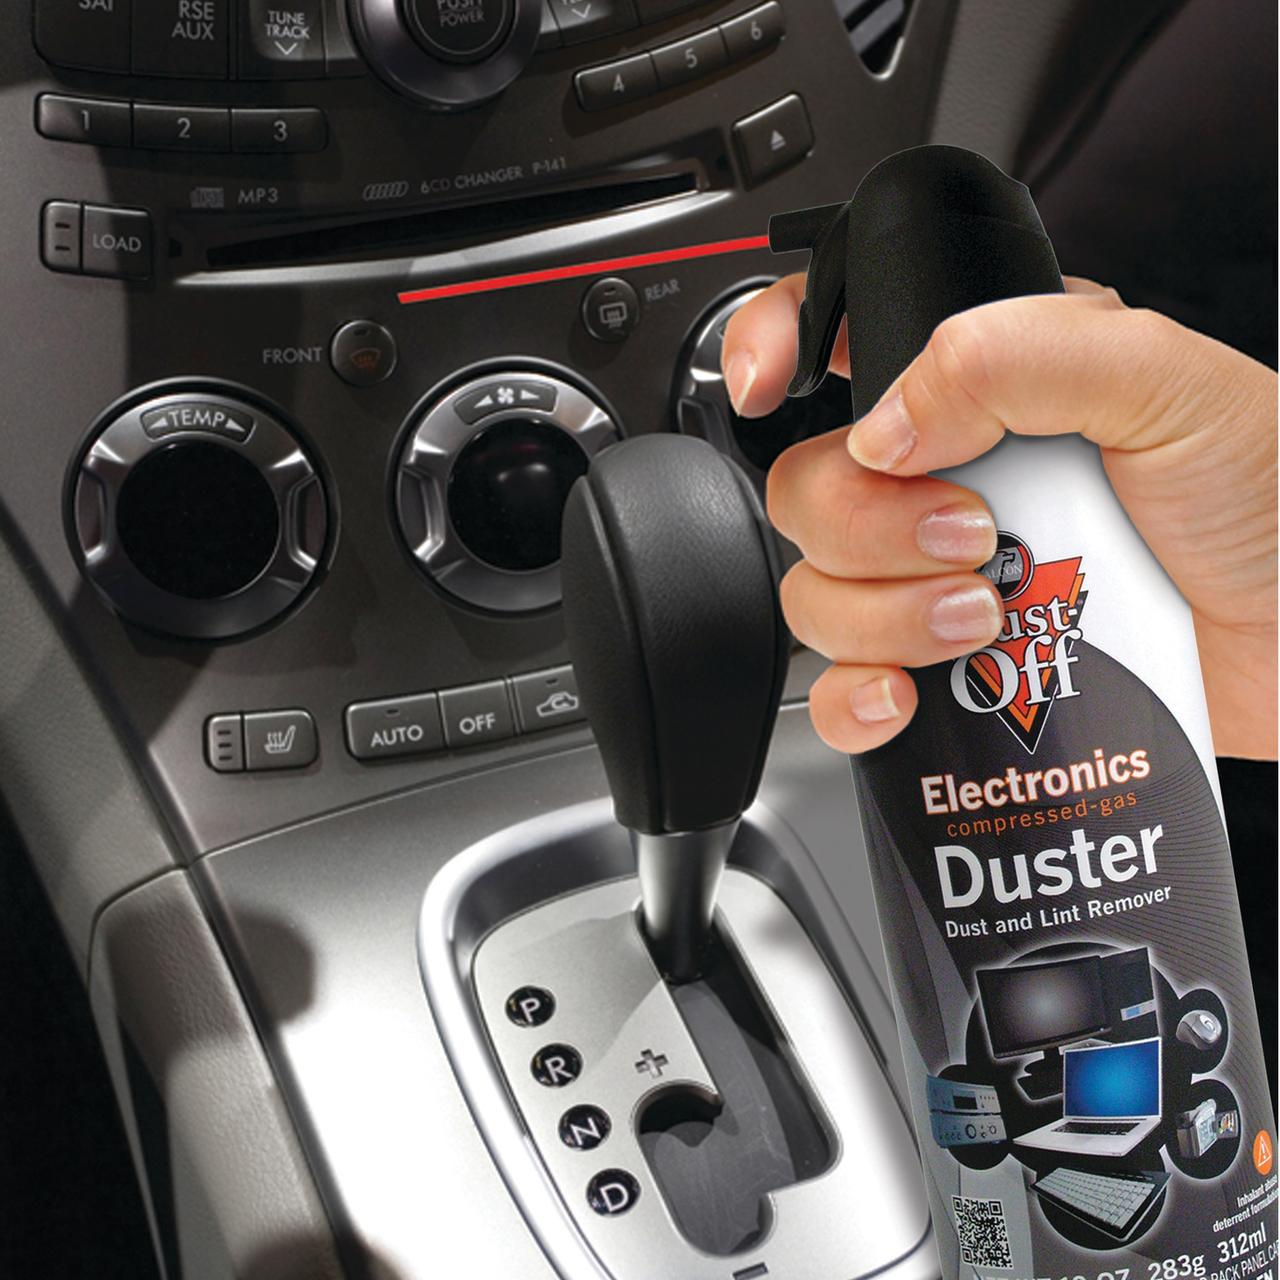 Dust-off® Disposable Dusters (3 Pk) - image 3 of 9